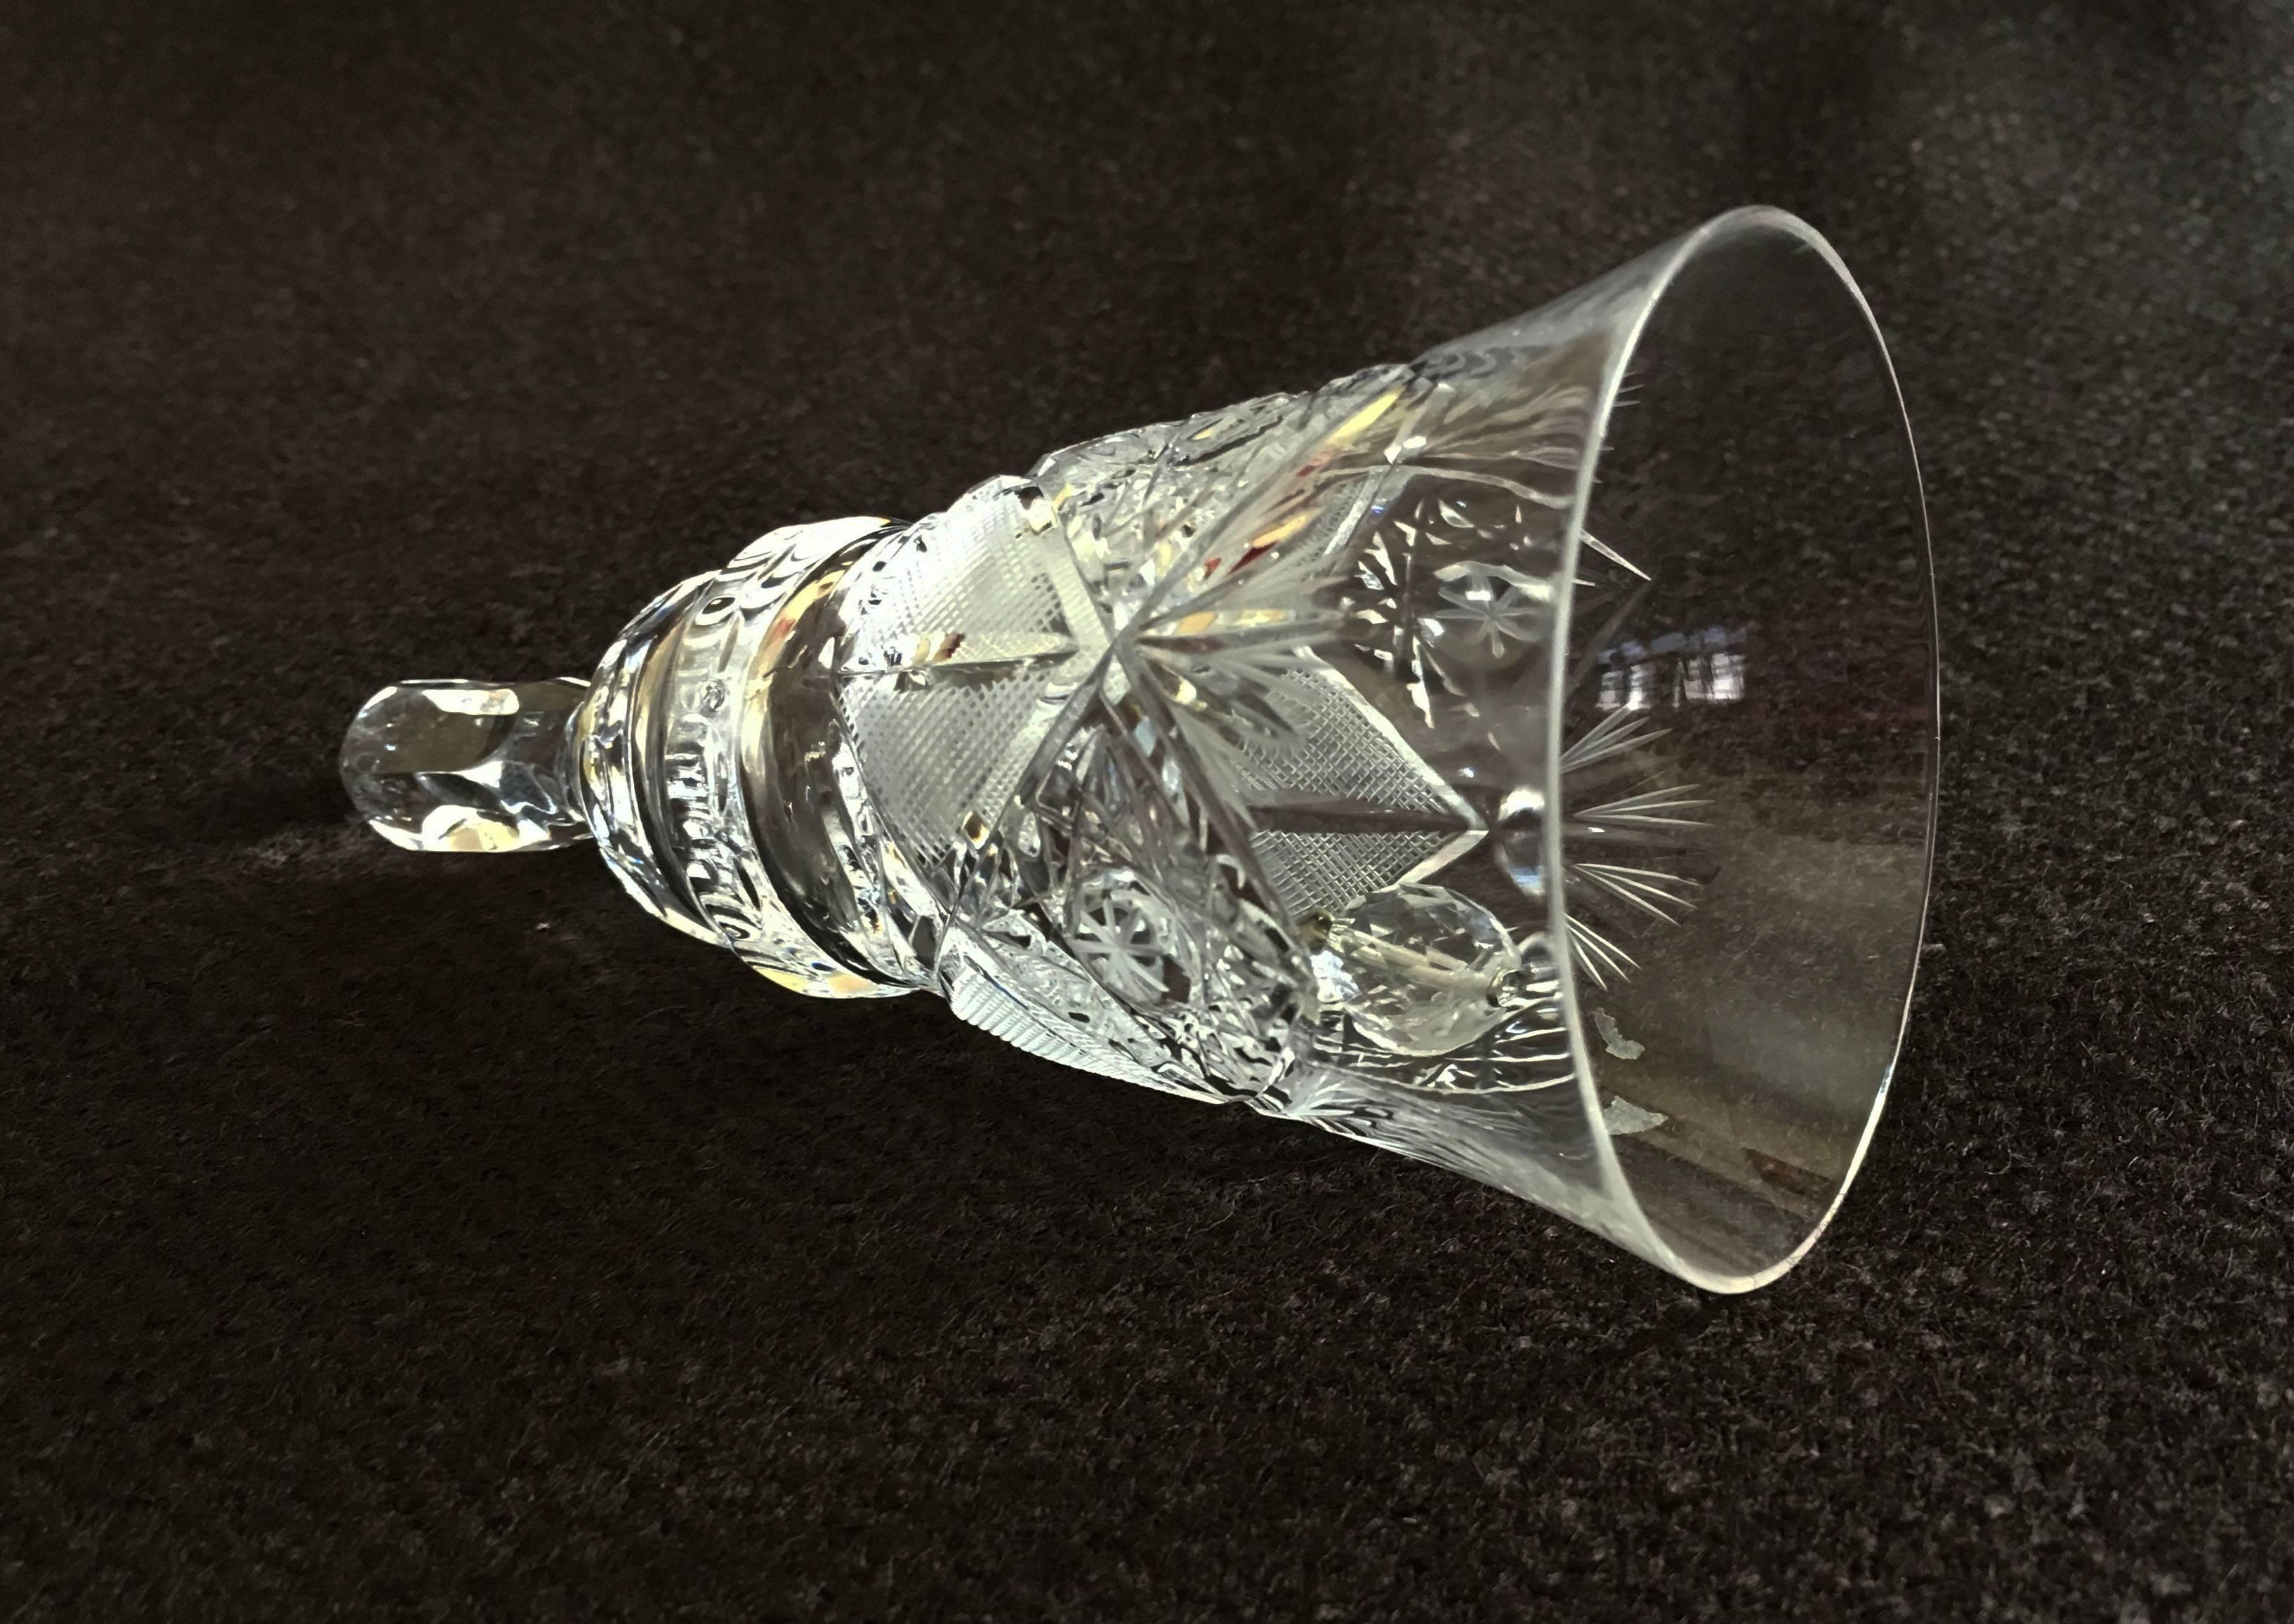 Extravagant cut and polished crystal table bell made, circa 1970s in one of the Bohemian glass works. The cutting is especially fine and deep with the very intricate patterns.